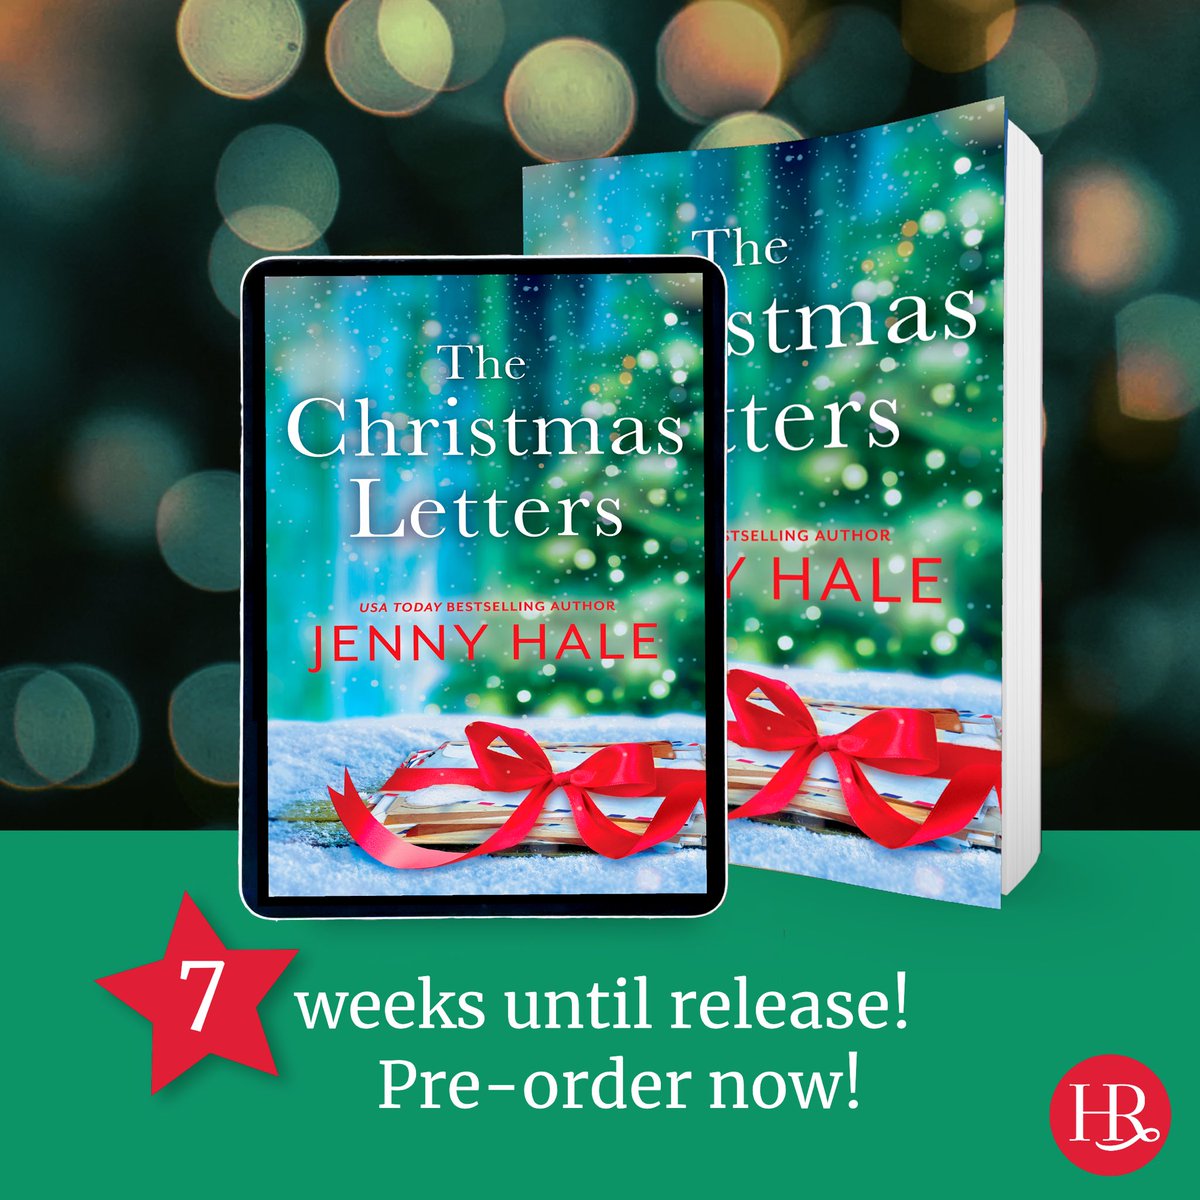 Only 7 weeks until this festive @jhaleauthor story is in your hands! Pre-order the eBook now! https://t.co/odWgrsF5Ch https://t.co/tpDq5oeCPK